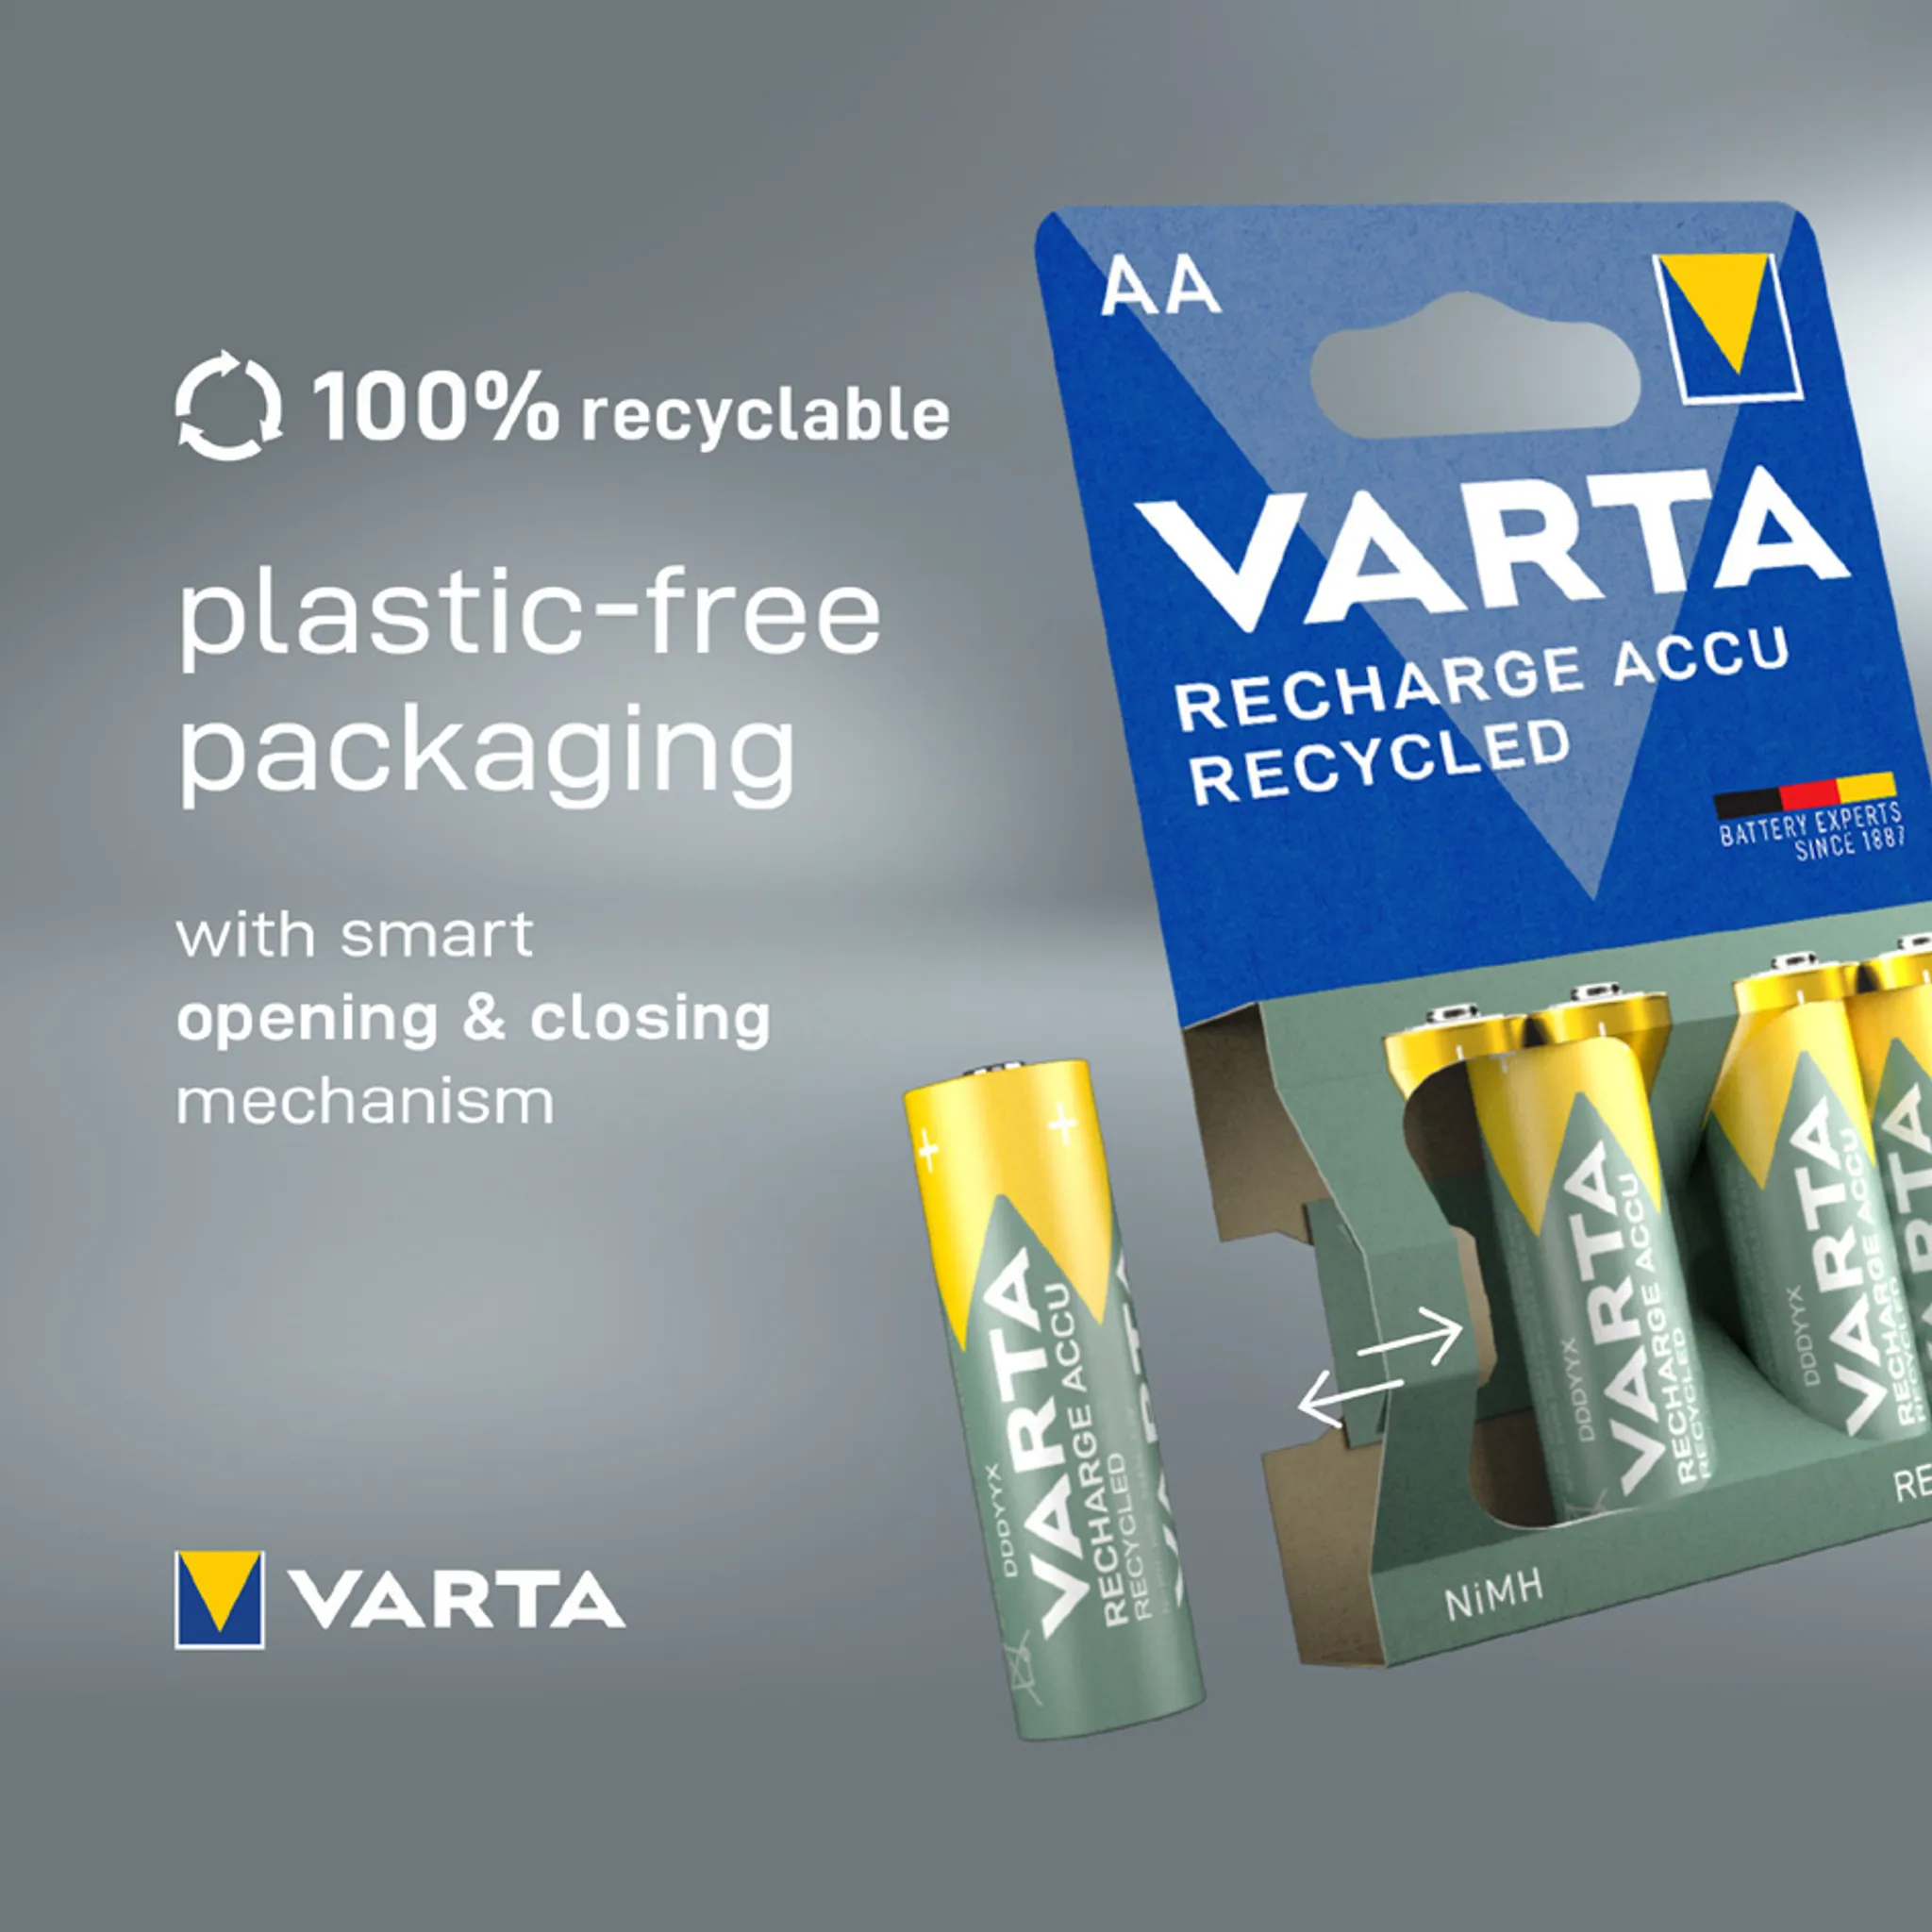 Varta Recharge Accu Recycled 56816 - Batterie